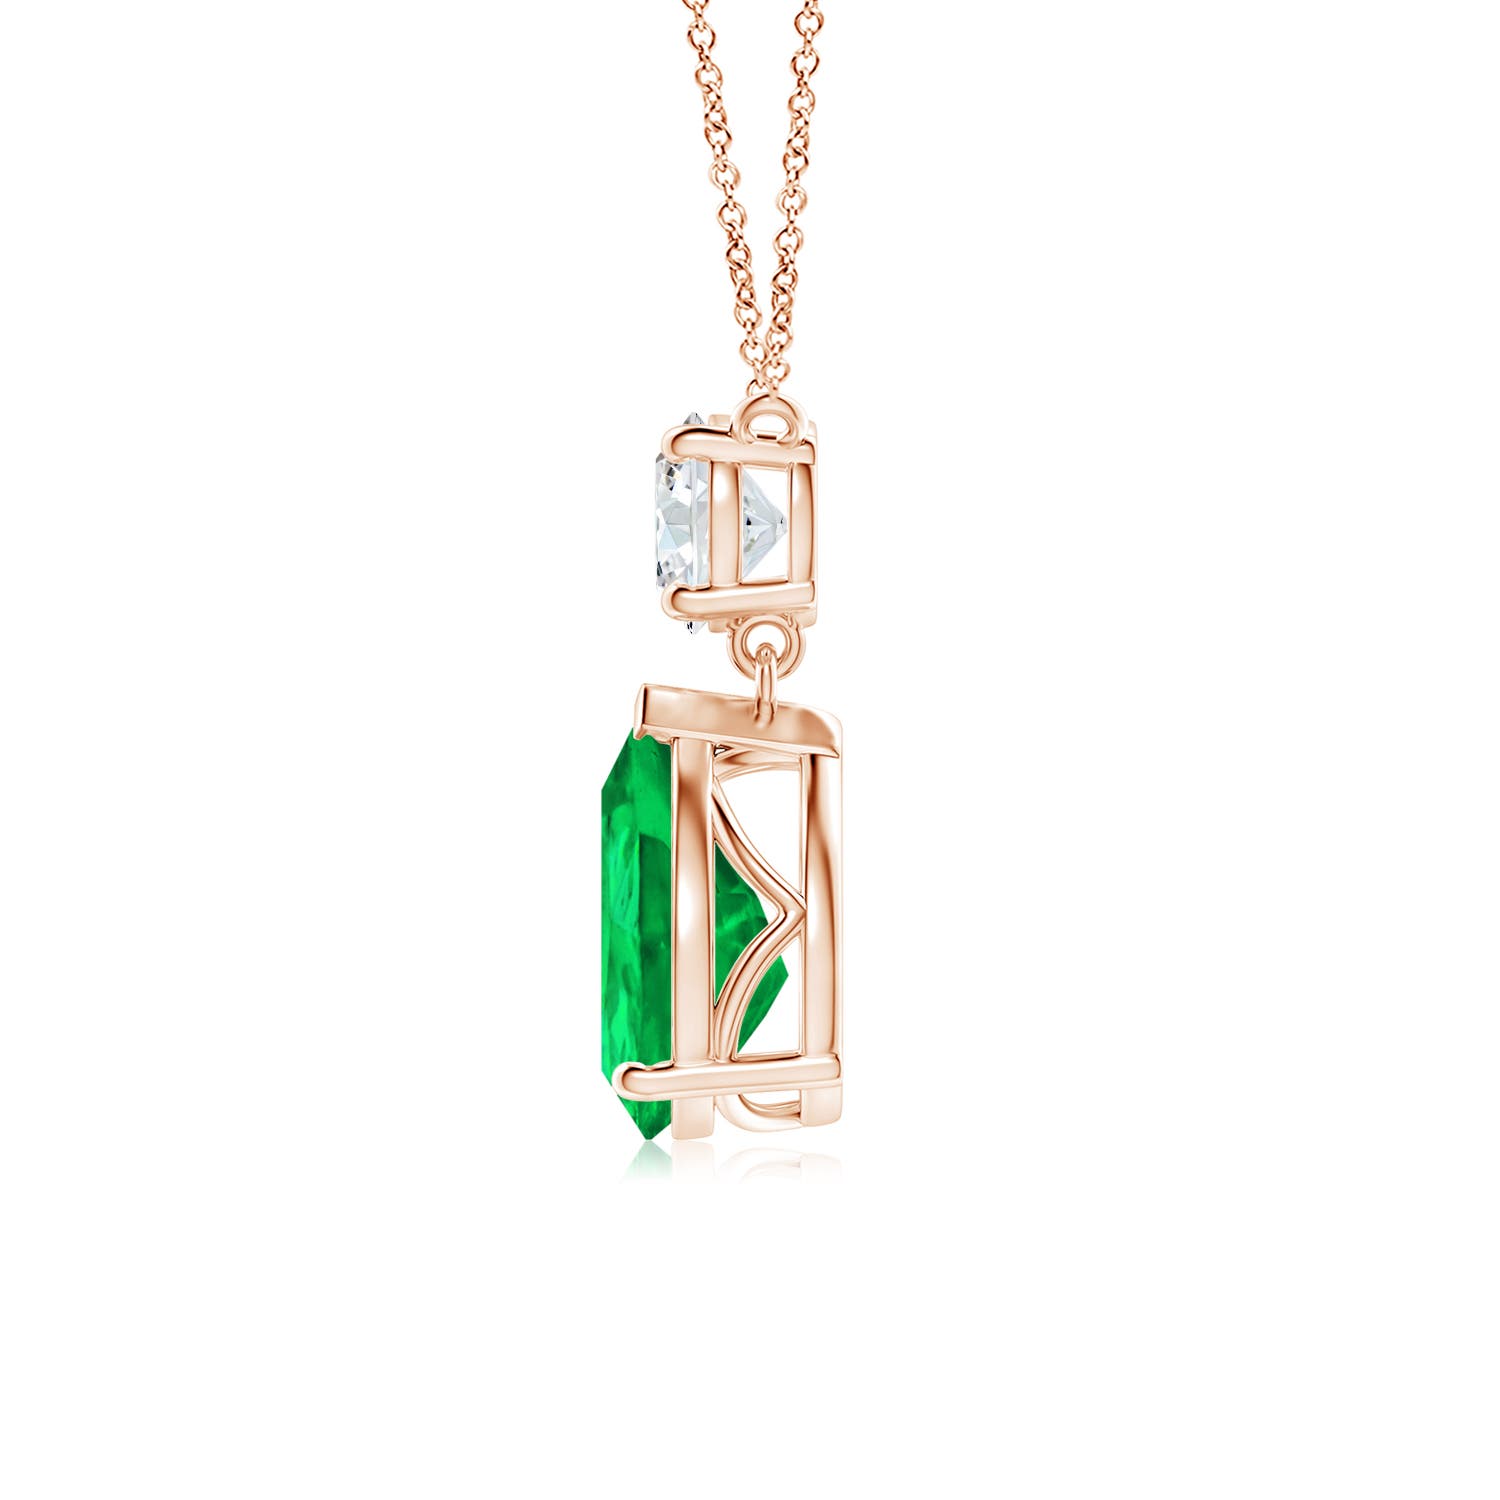 AAA - Emerald / 3 CT / 18 KT Rose Gold